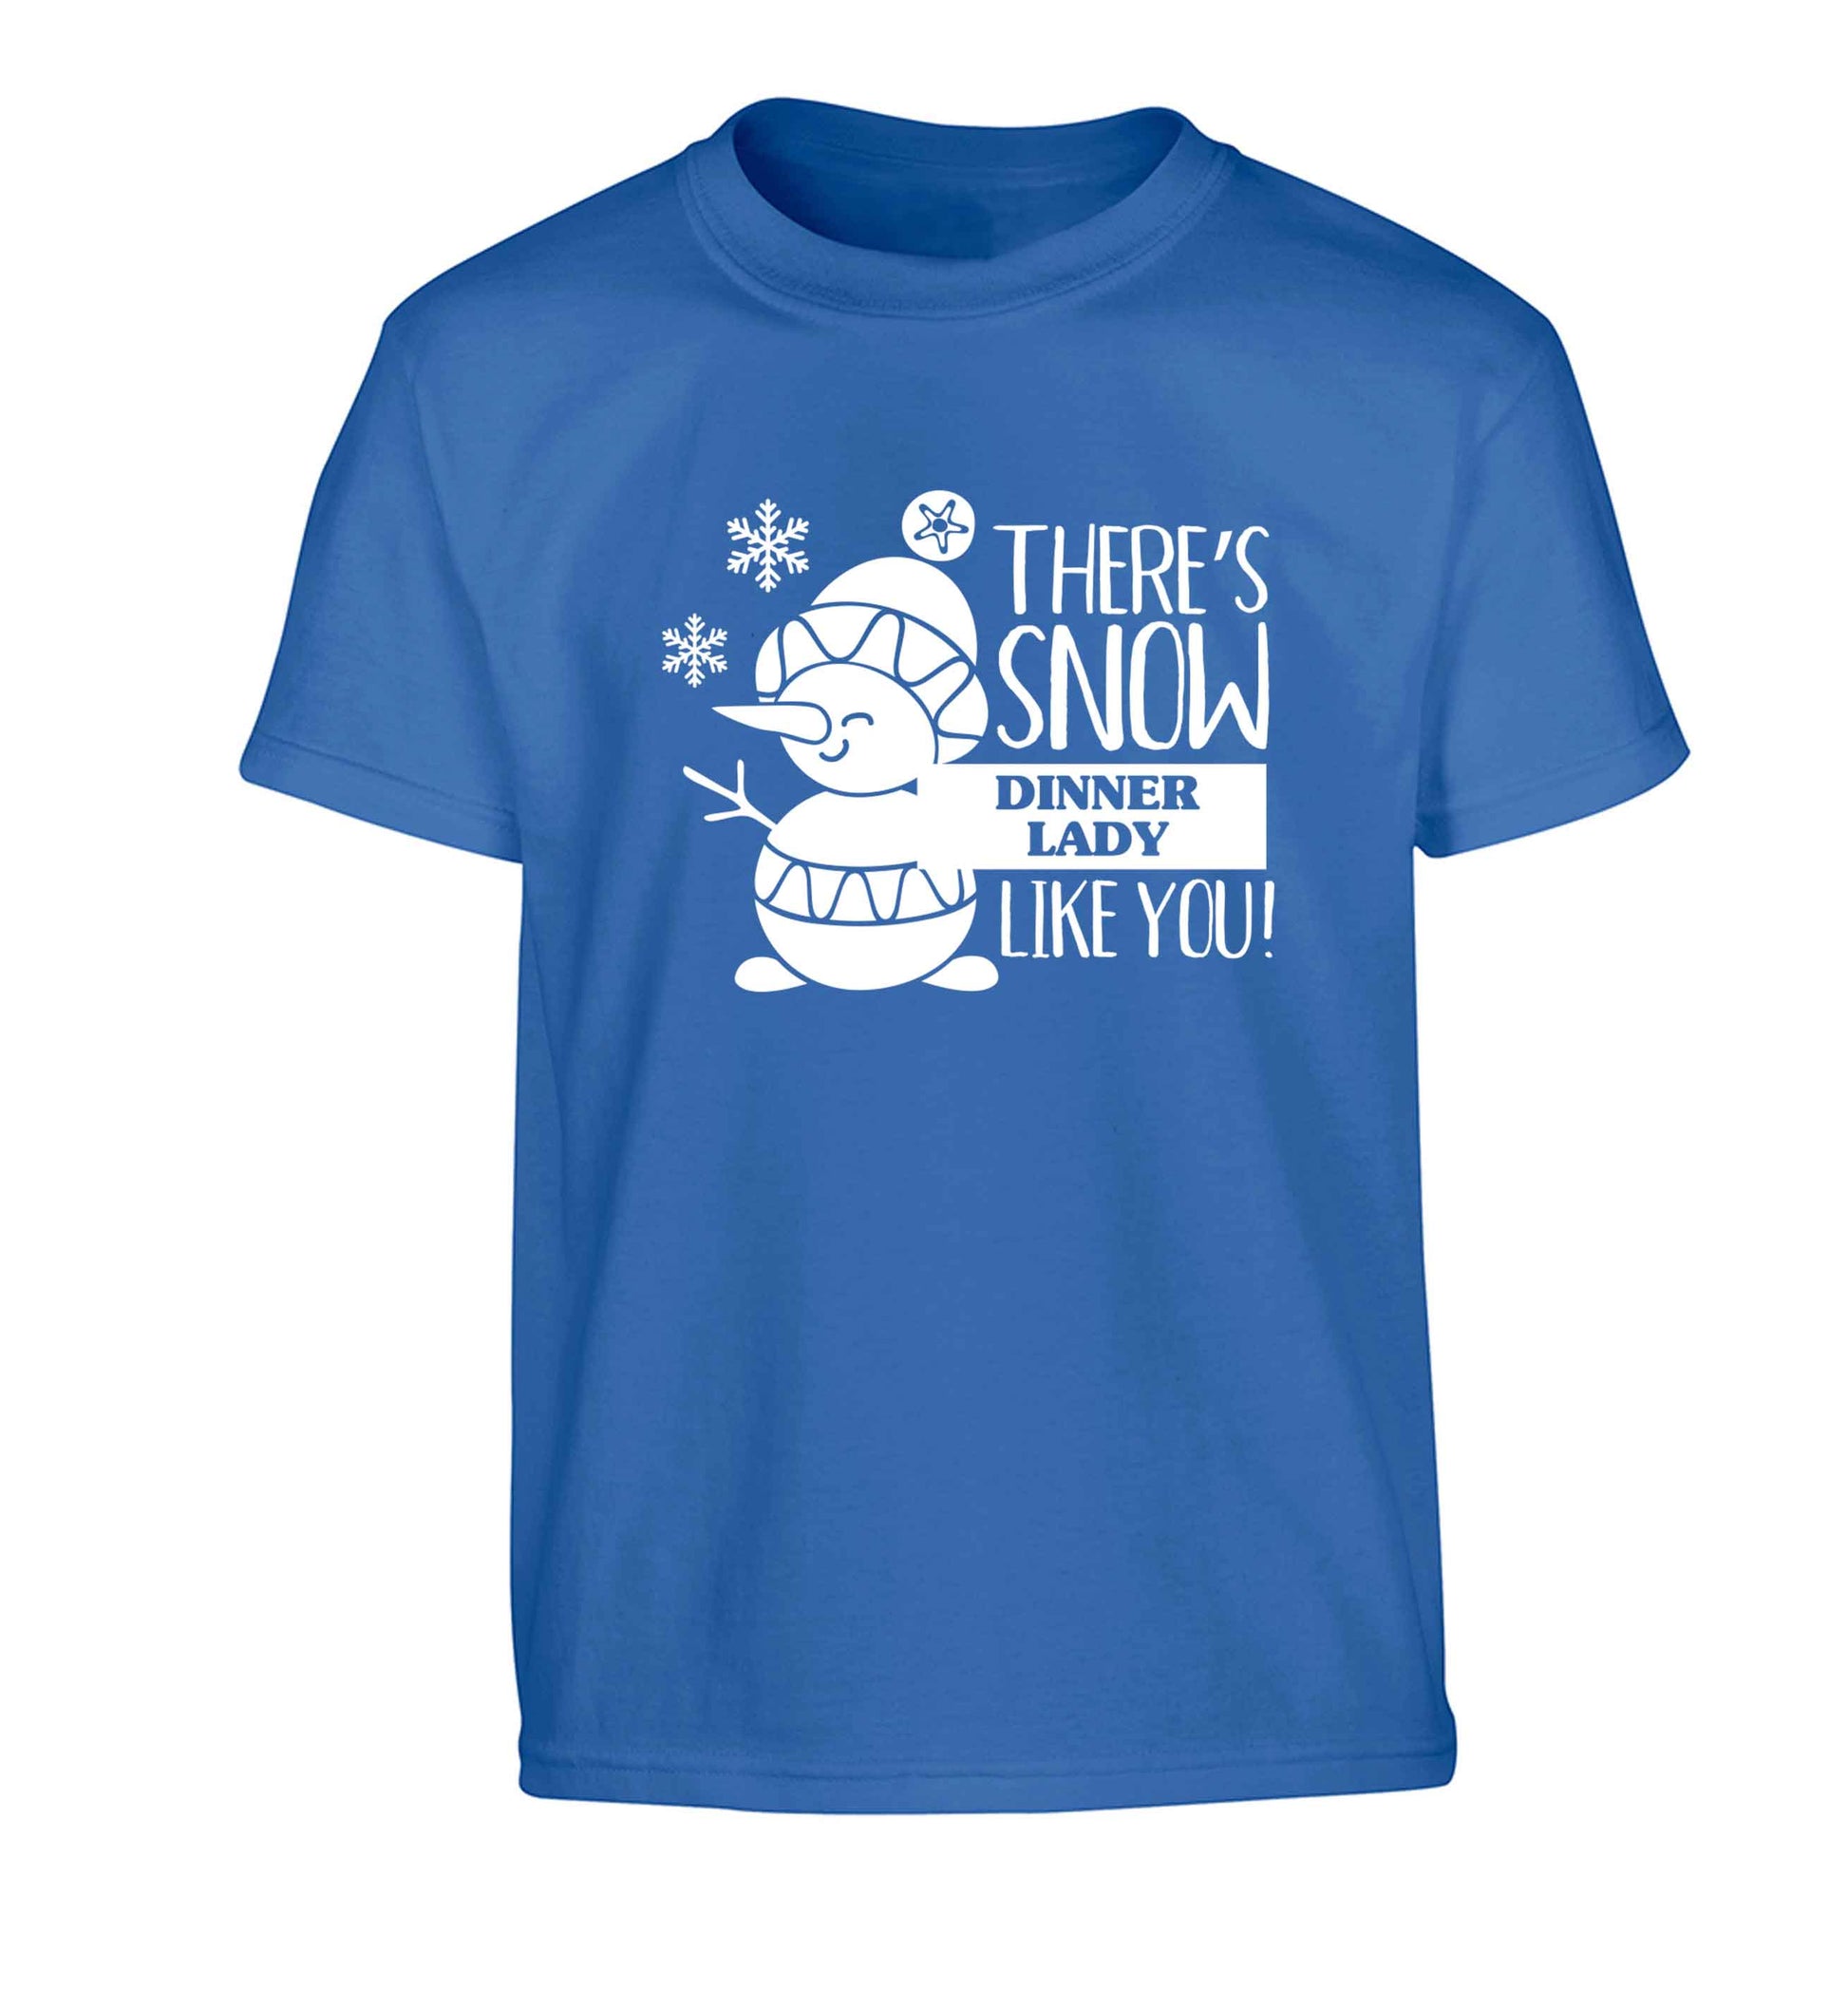 There's snow dinner lady like you Children's blue Tshirt 12-13 Years